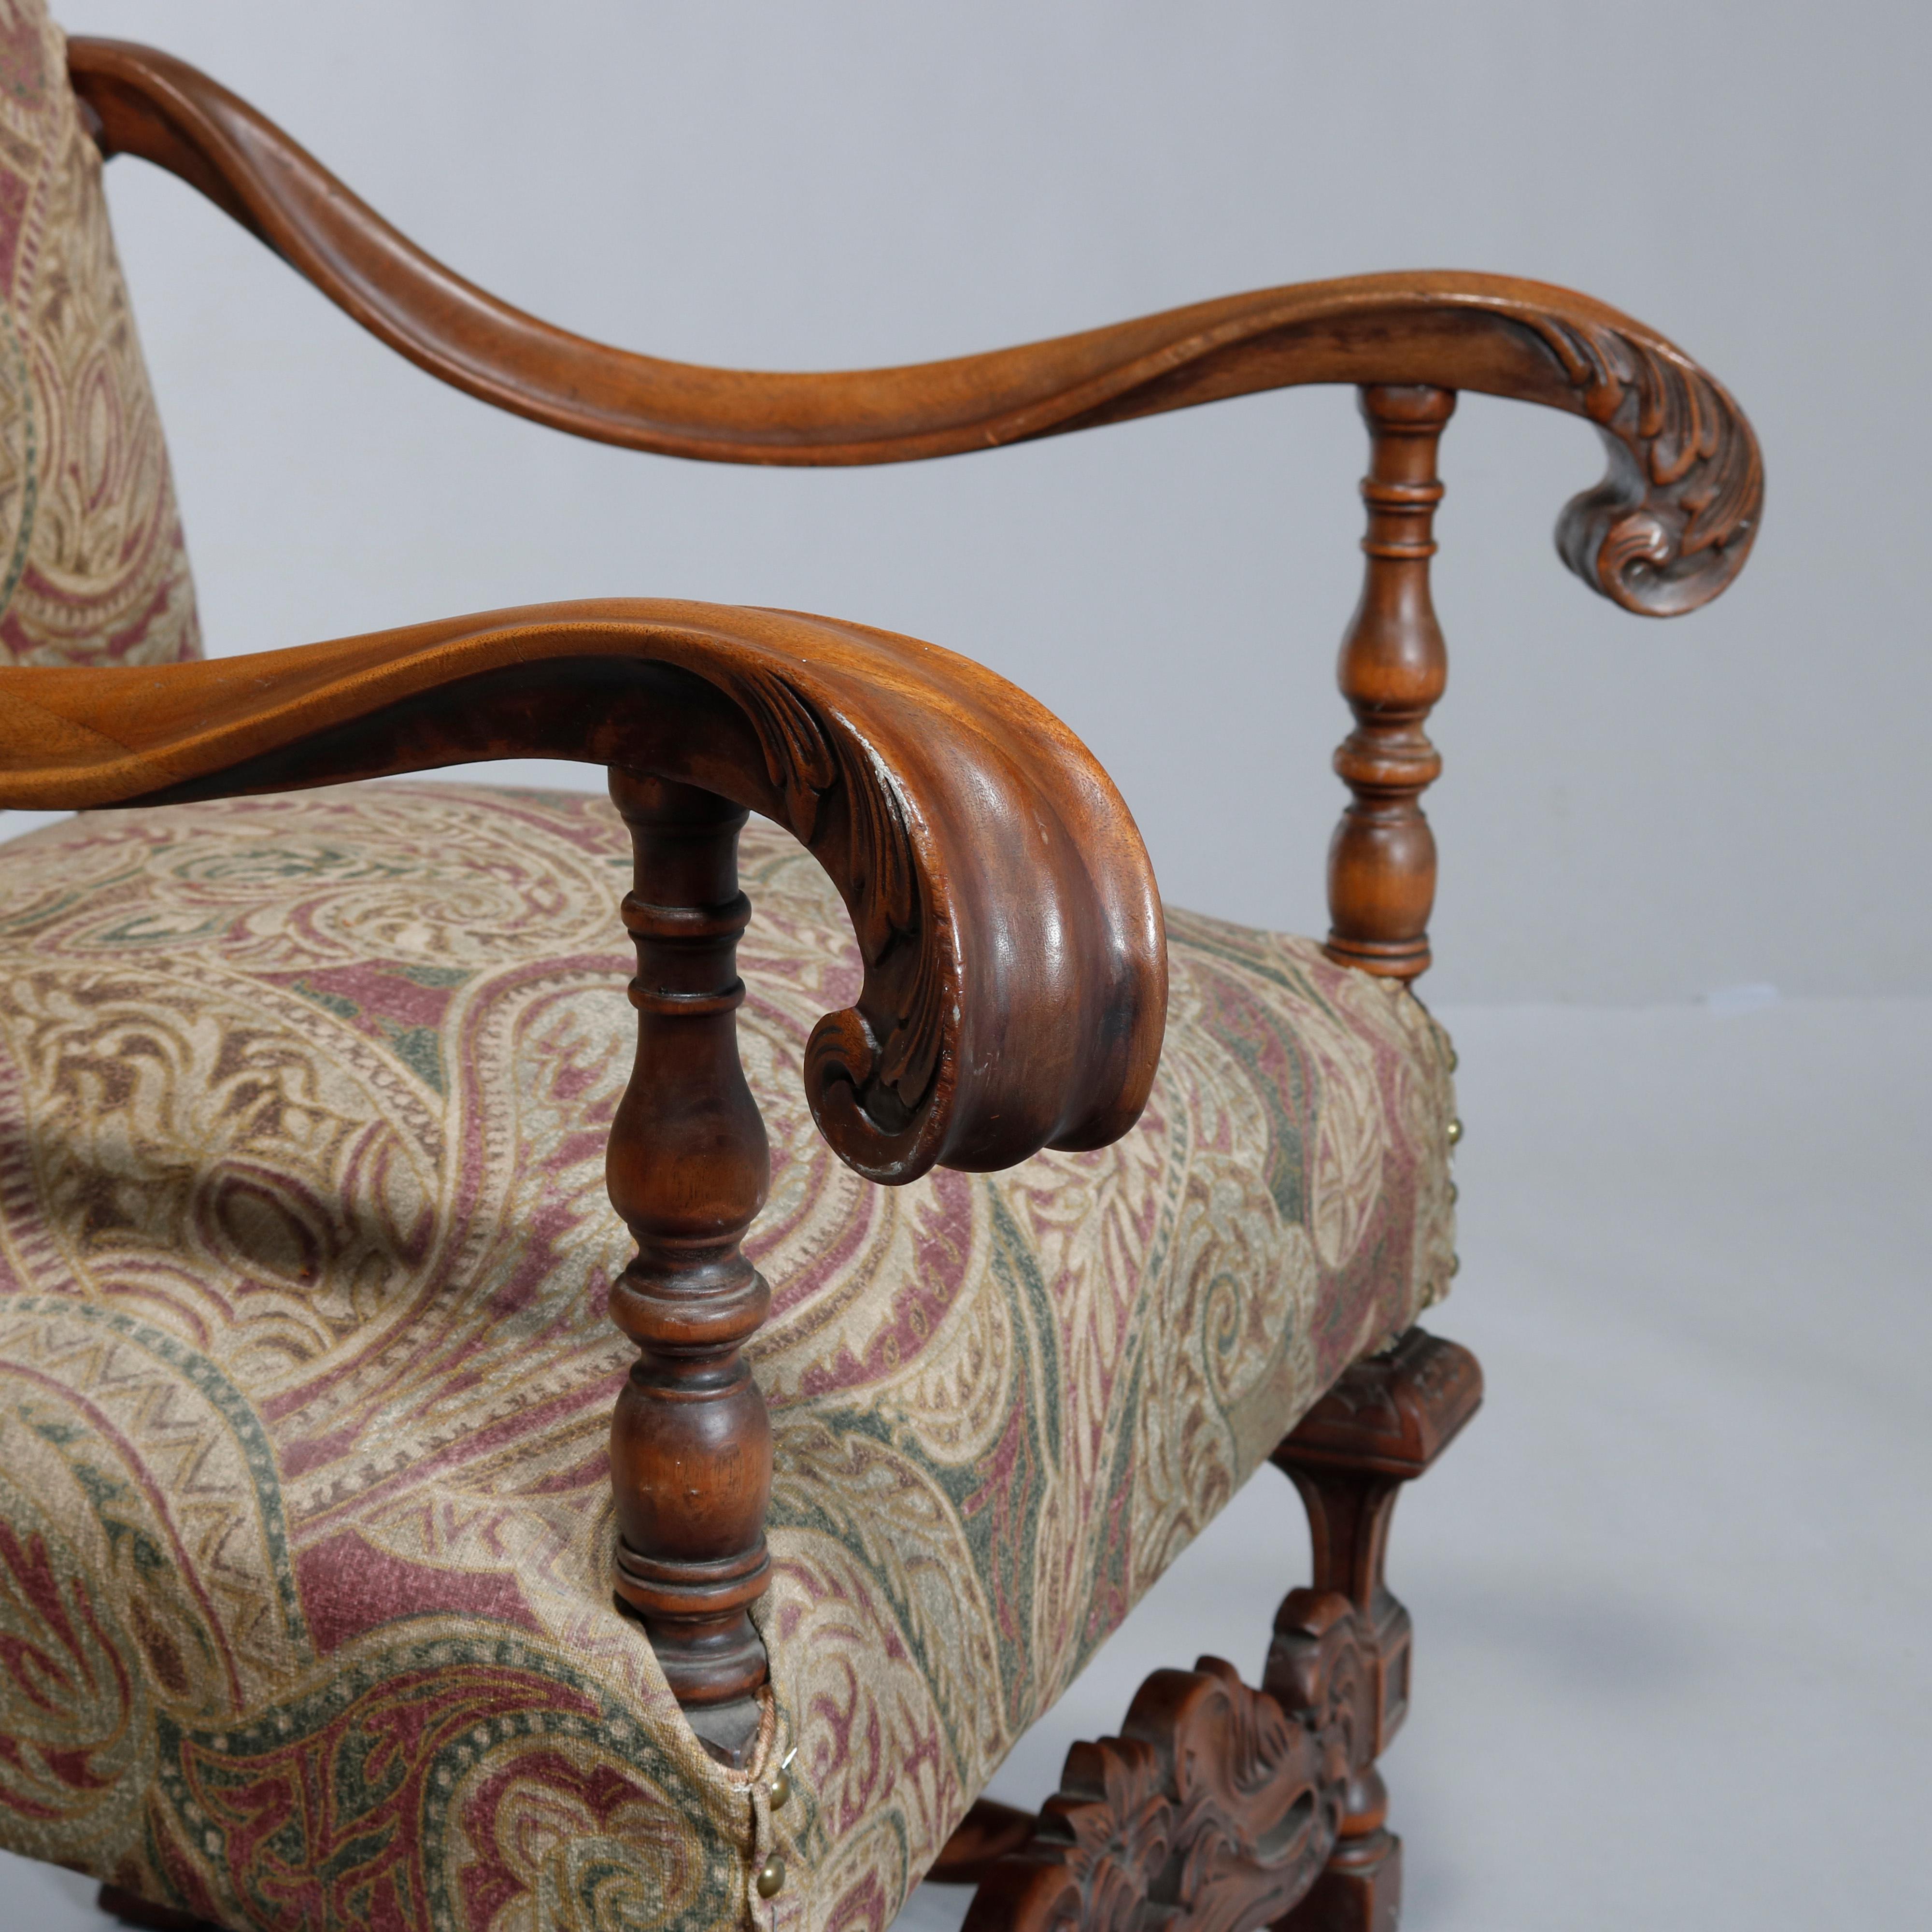 Antique Italian Renaissance Revival Style Carved Walnut Throne Chair, circa 1900 For Sale 1